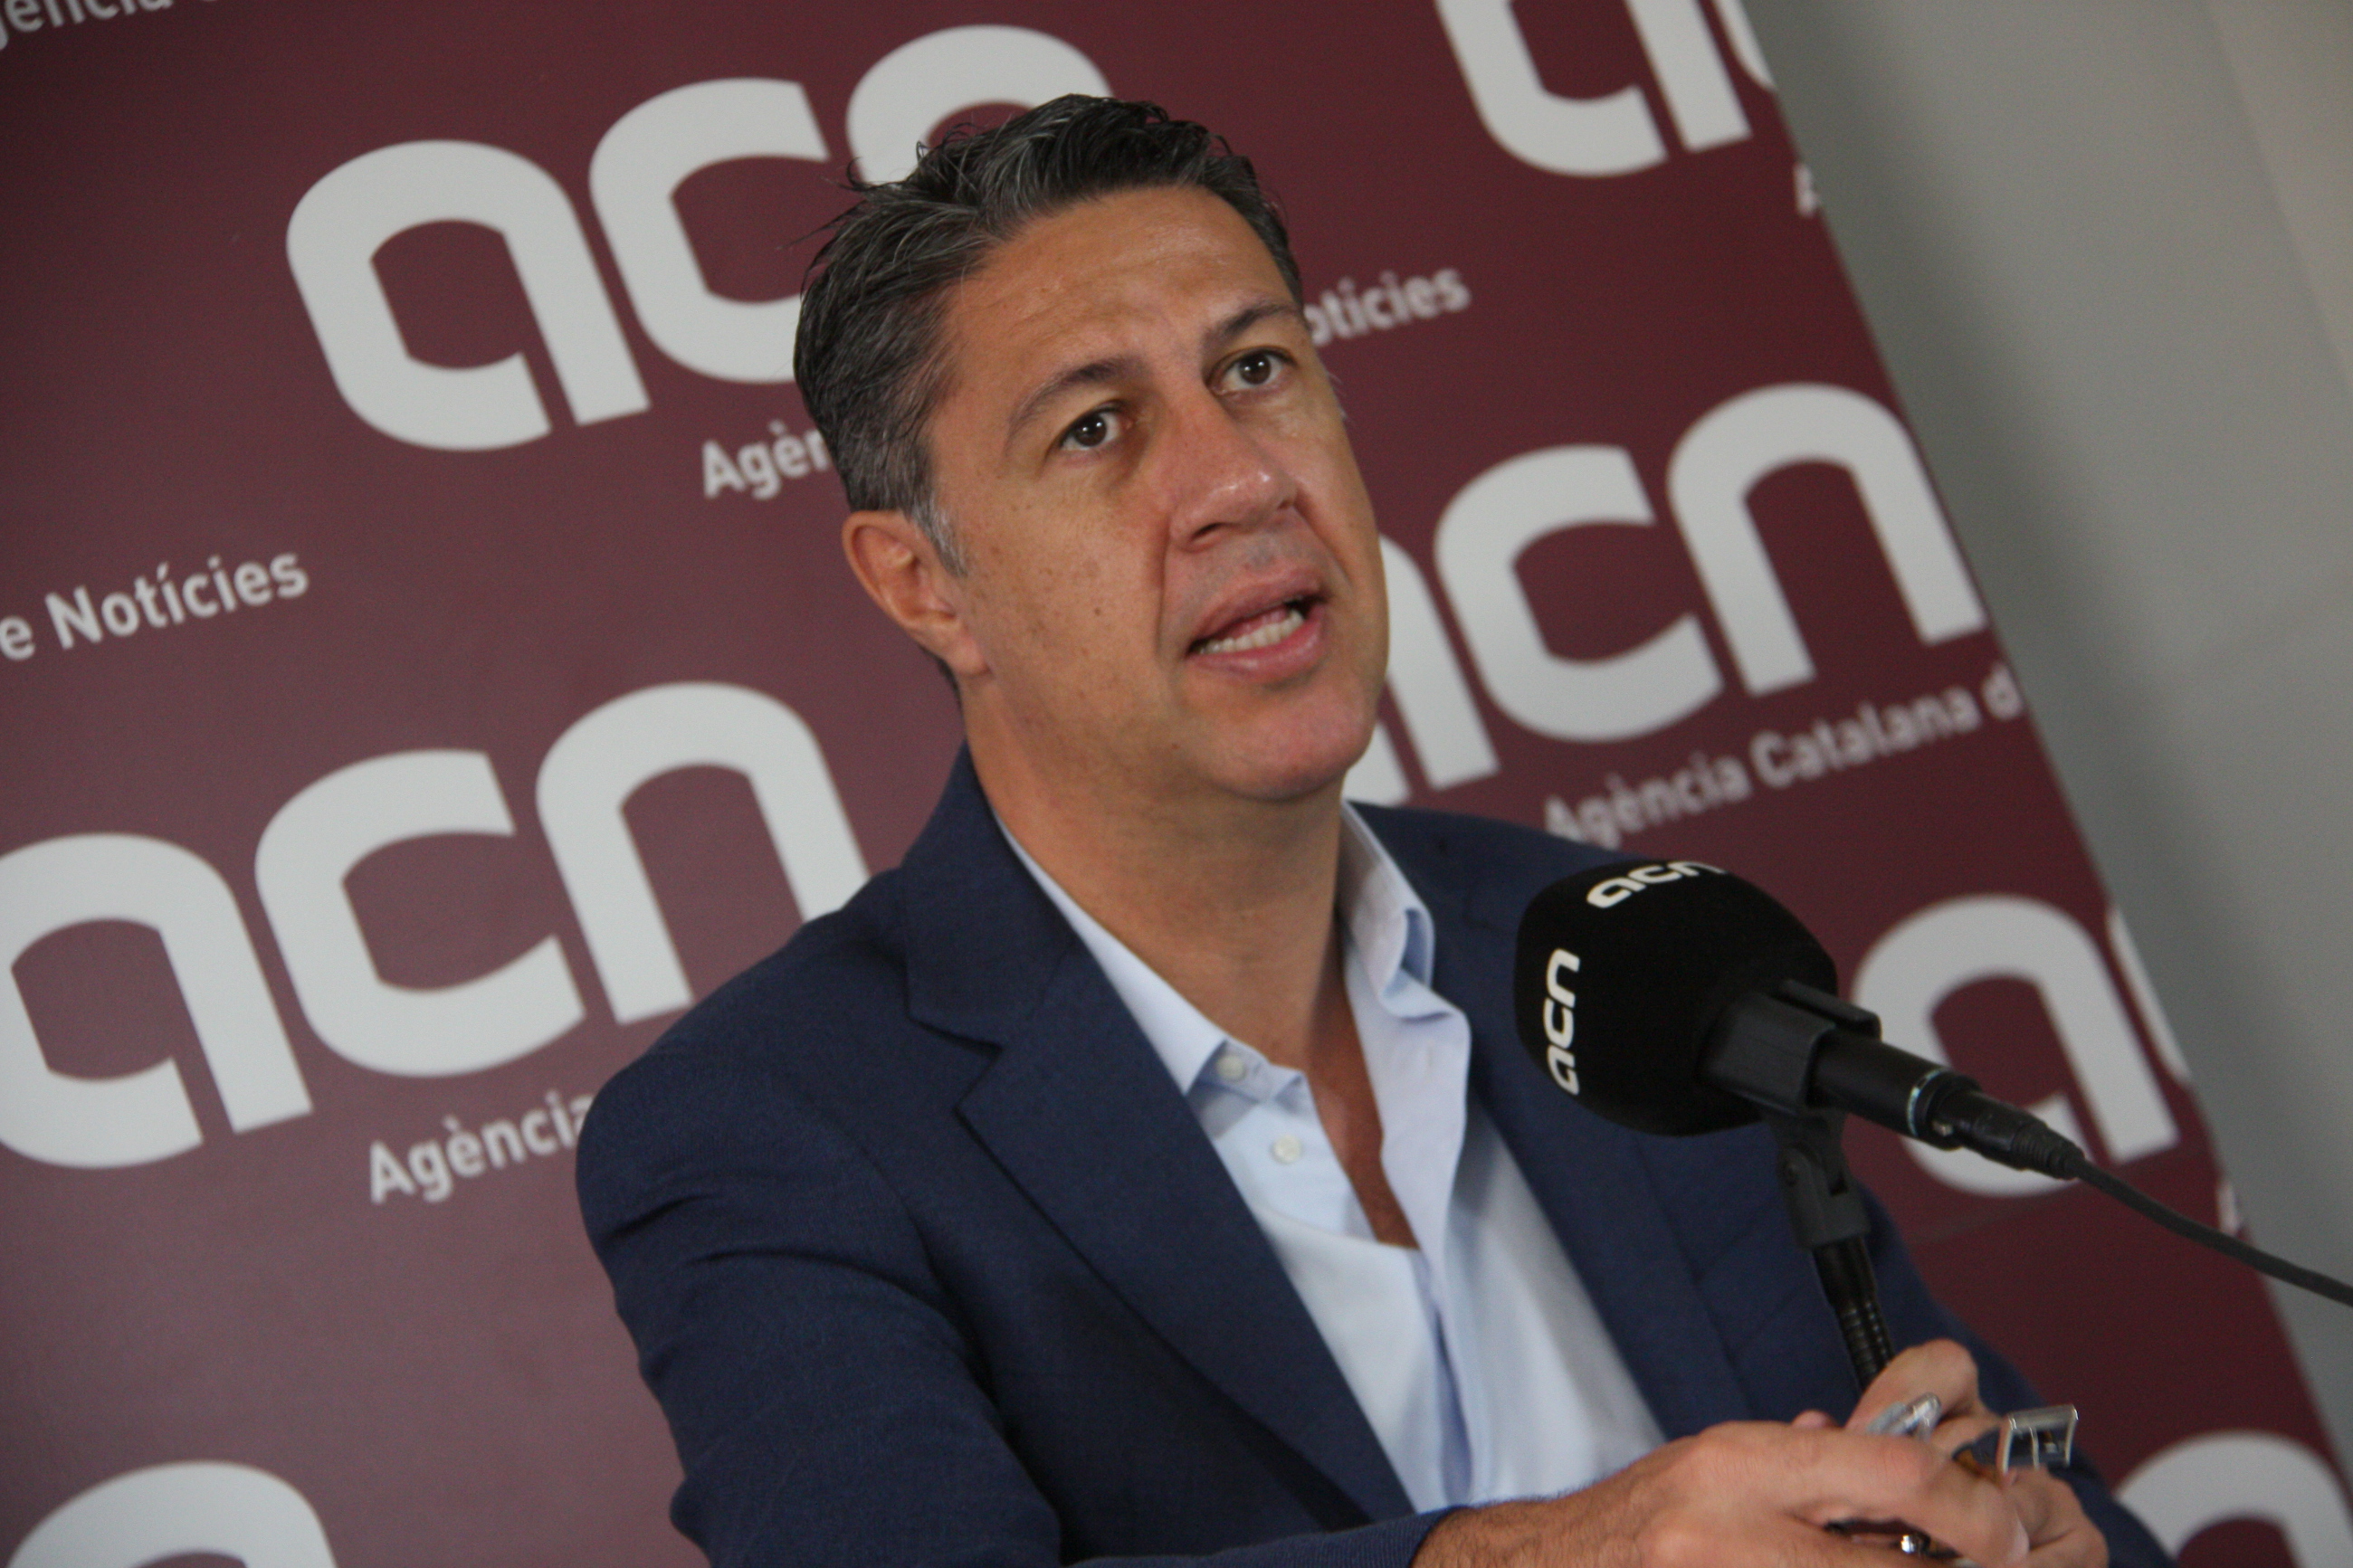 PPC's candidate Xavier García Albiol's press conference at CNA headquarters (by ACN)